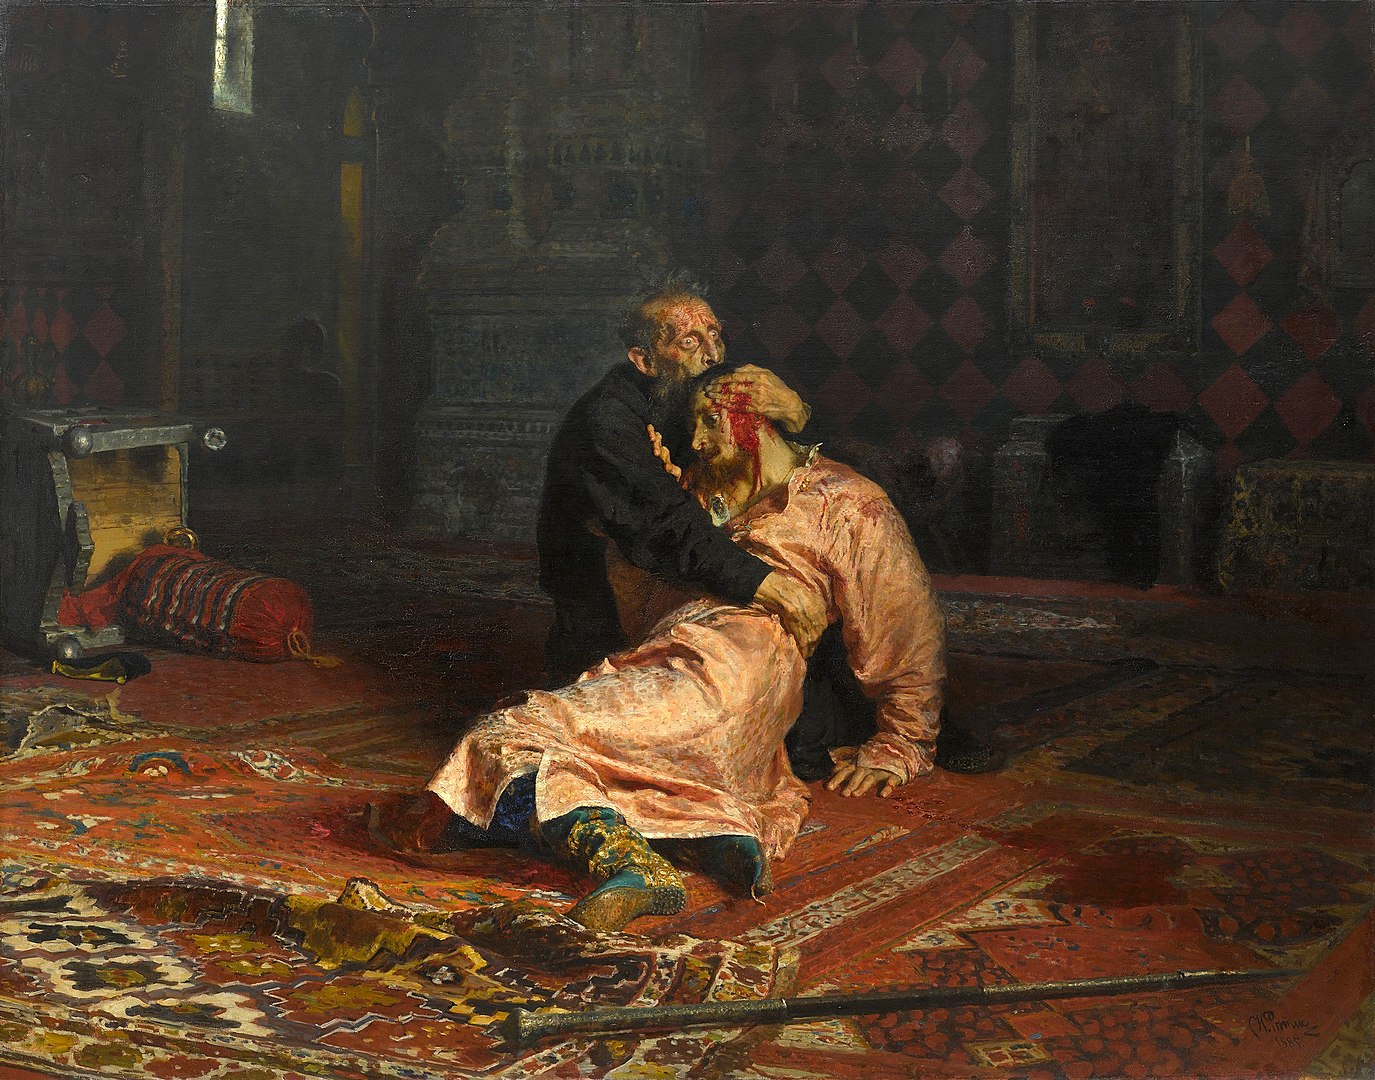 Ilya Repin - Ivan, the terrible, and his son